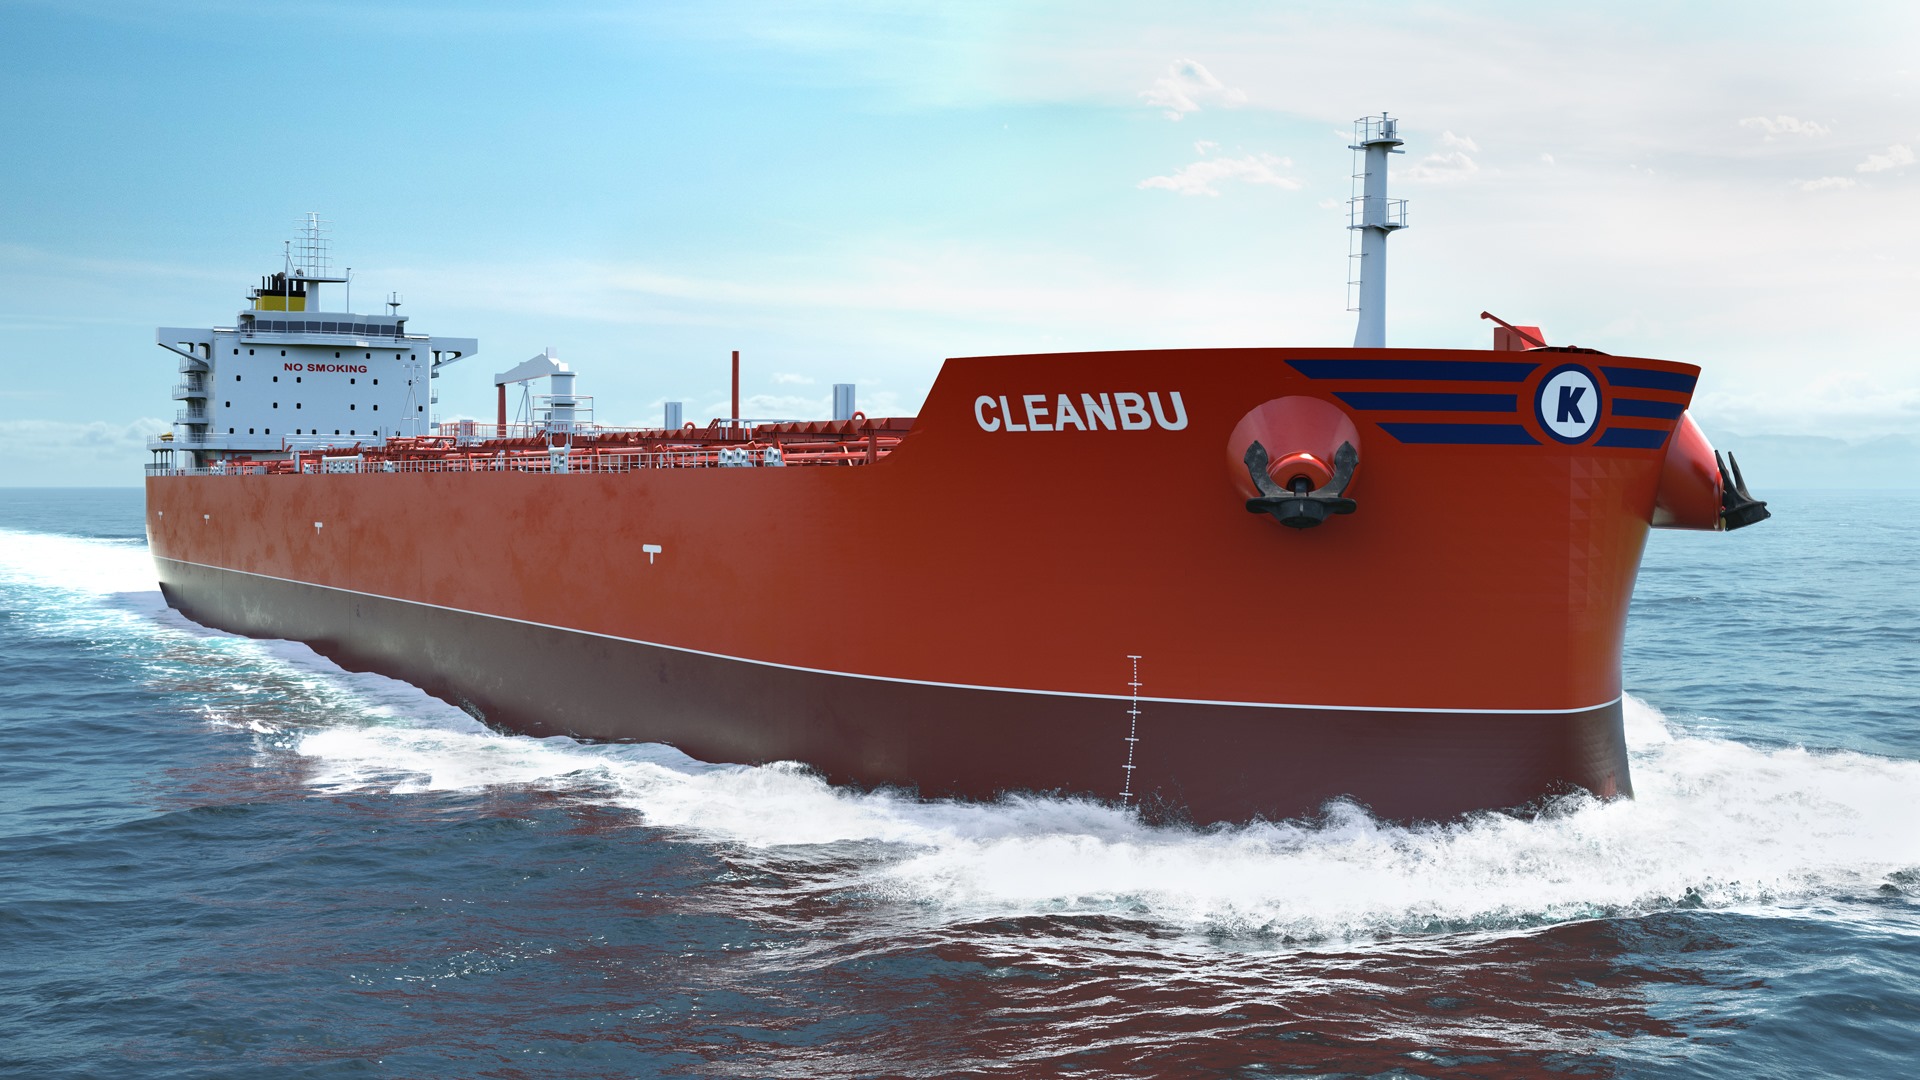 Klaveness Combination Carriers ASA continues to increase tanker market coverage in a strong tanker market